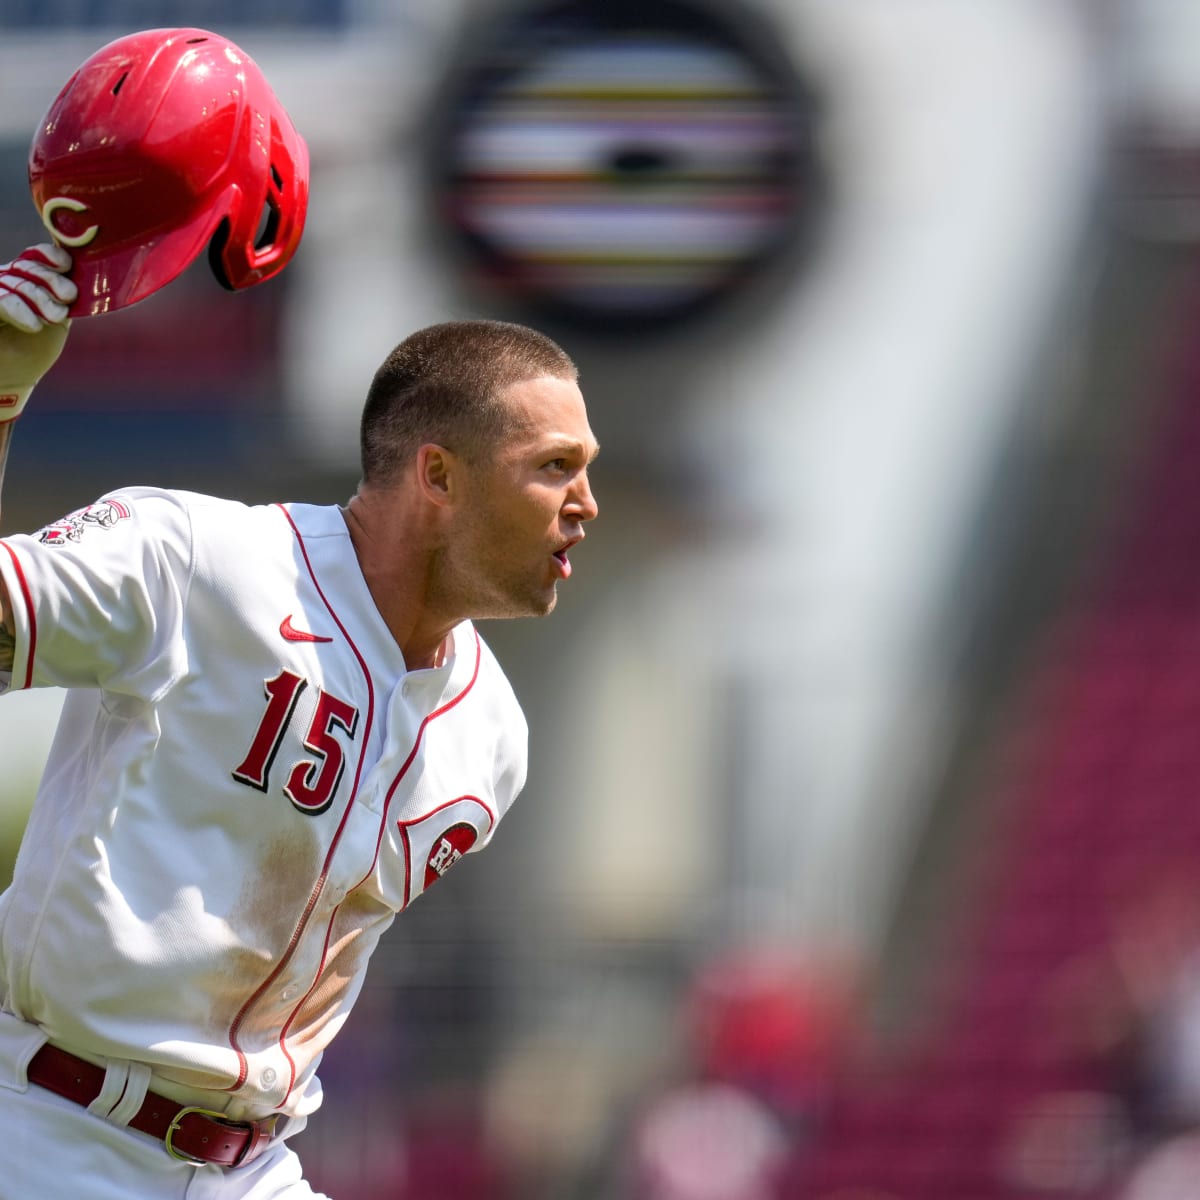 Reds vs. Giants stream: Watch online, TV channel - How to Watch and Stream  Major League & College Sports - Sports Illustrated.